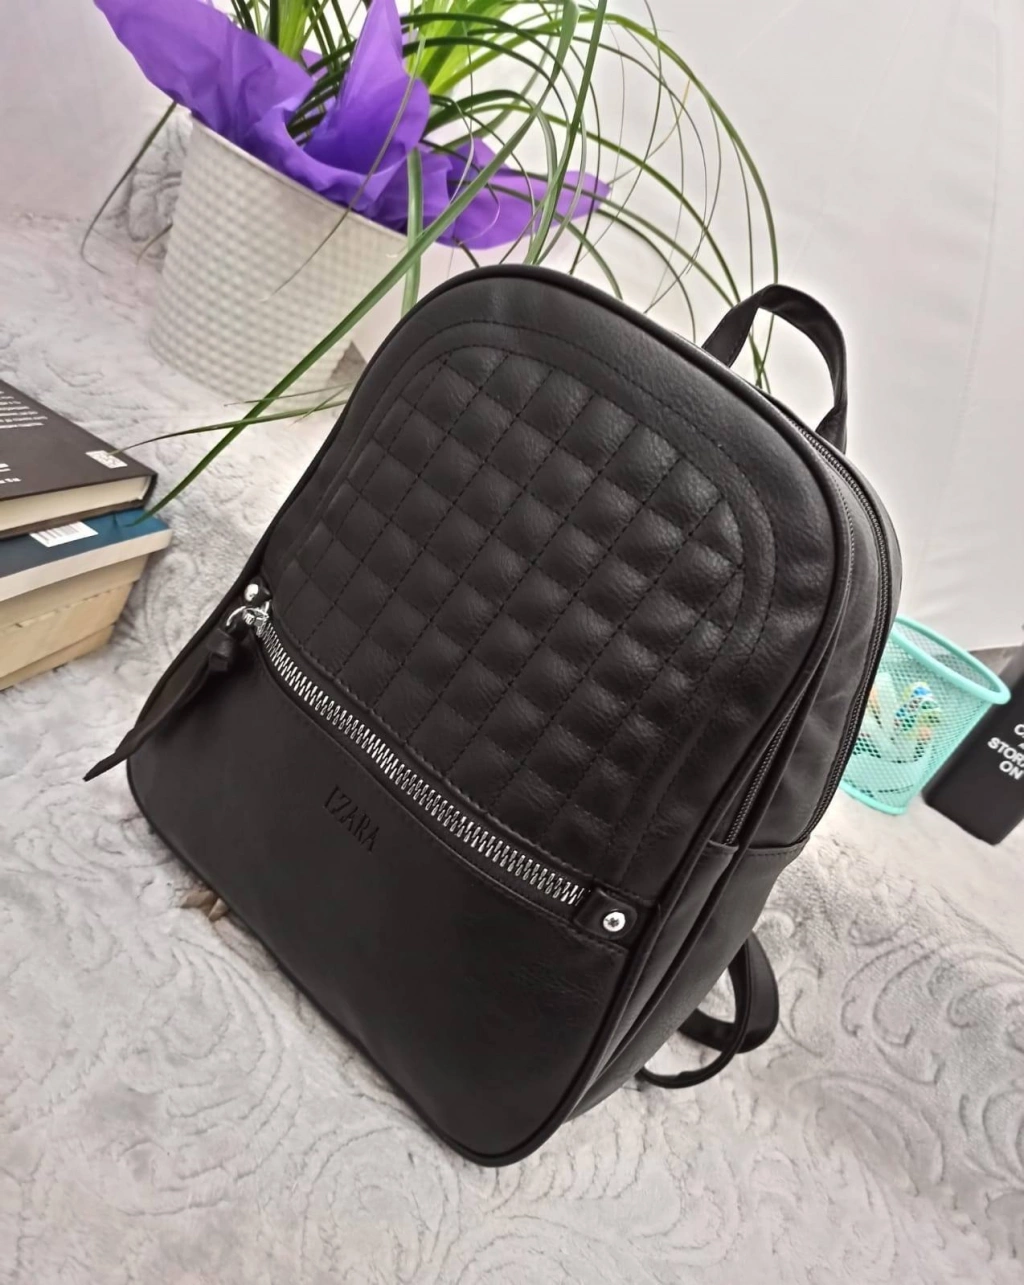 Lovely backpack with two compartments and a pocket